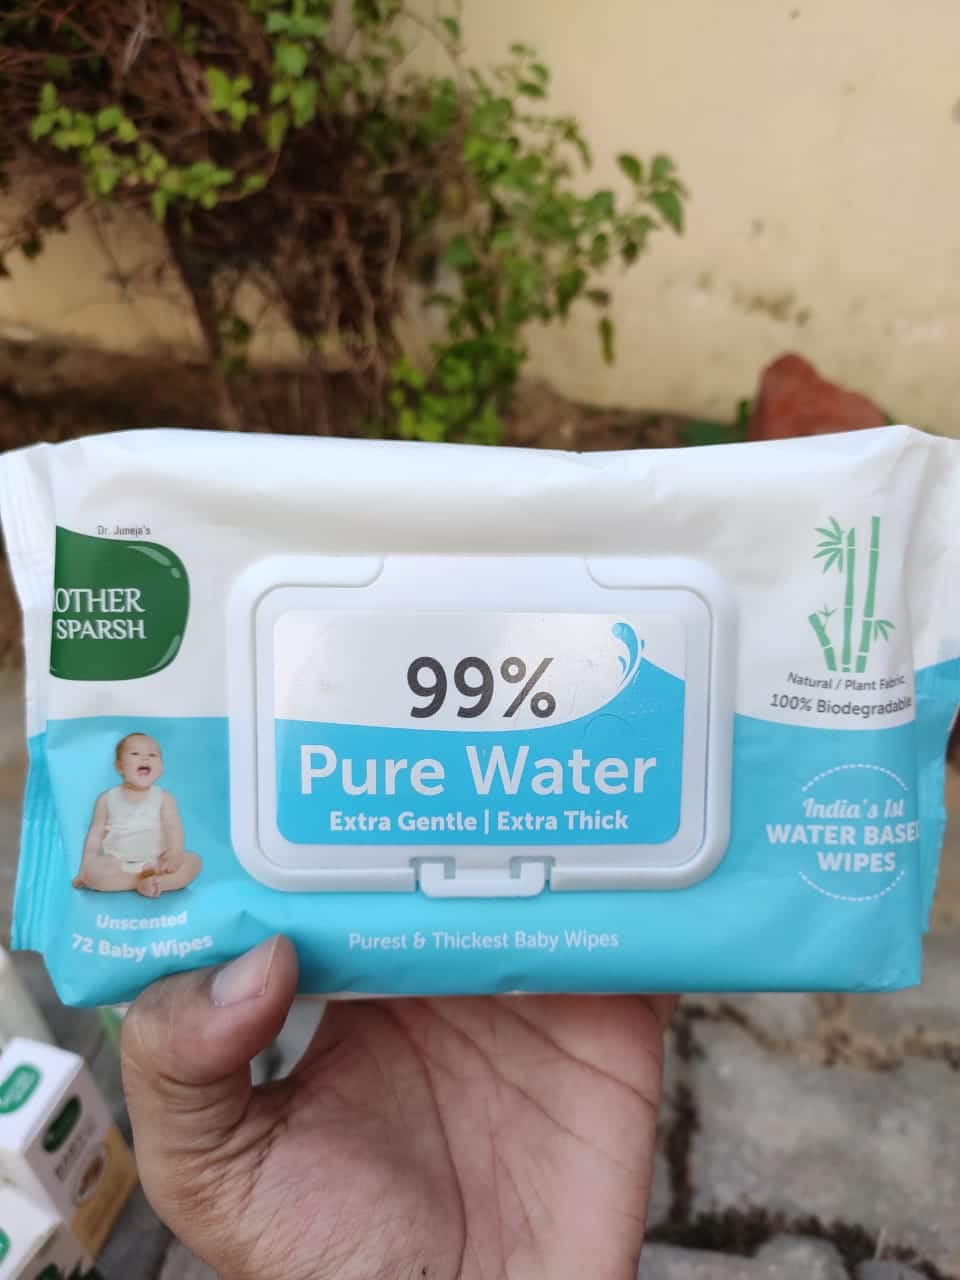 Mother Sparsh 99% Pure Water (Unscented) Baby Wipes I Natural Plant Made Cloth